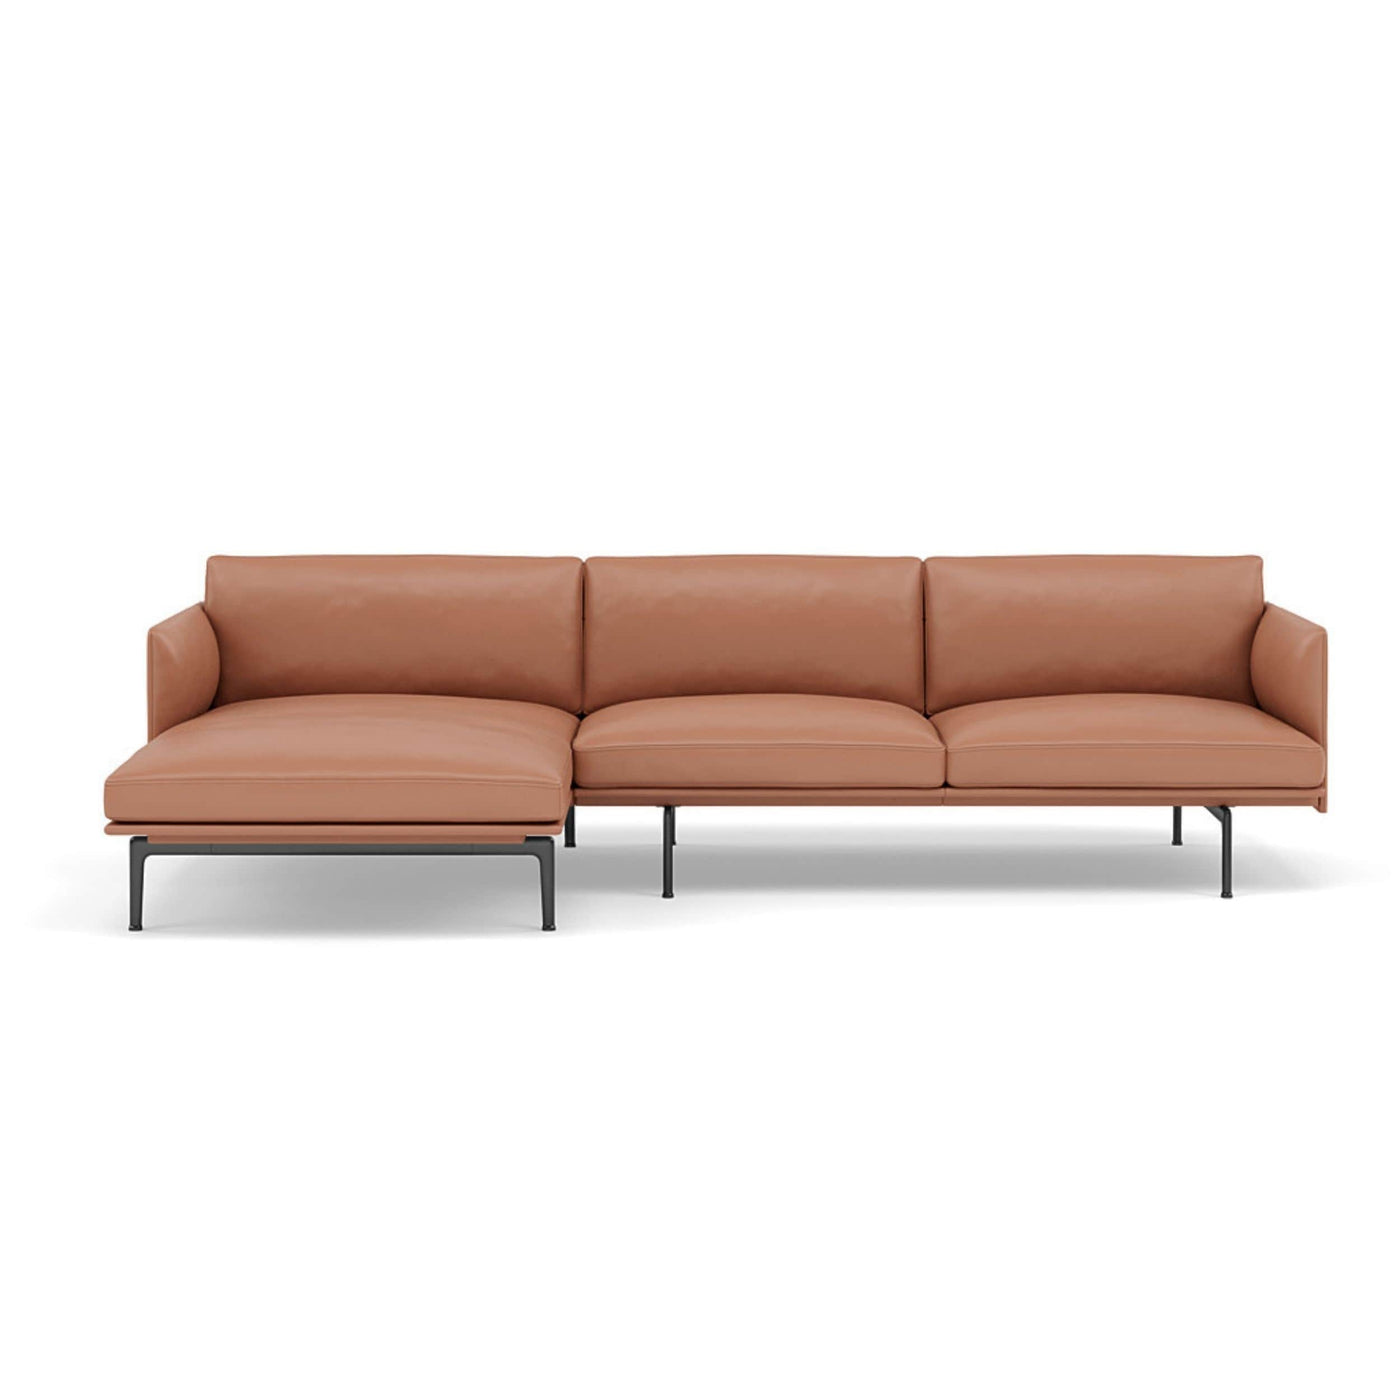 Muuto Outline Chaise Longue sofa in cognac refine leather. Made to order from someday designs. #colour_cognac-refine-leather